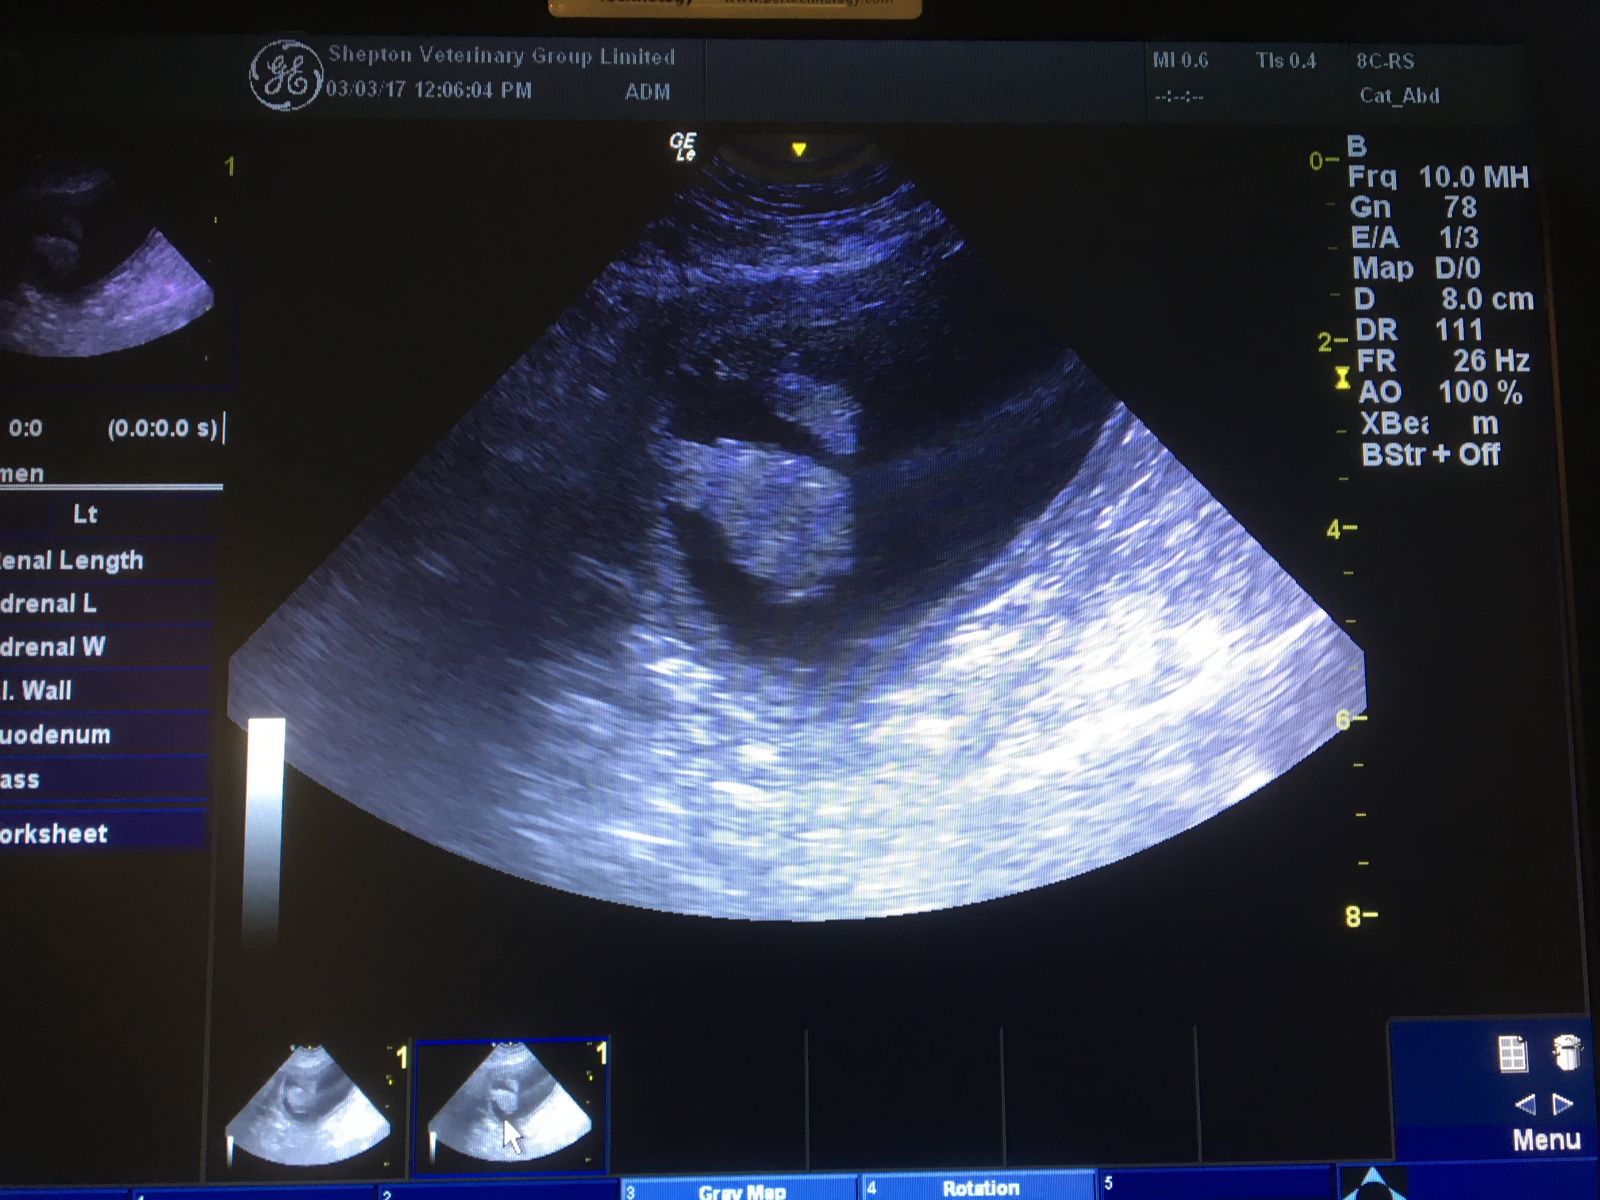 Chester's ultrasound image